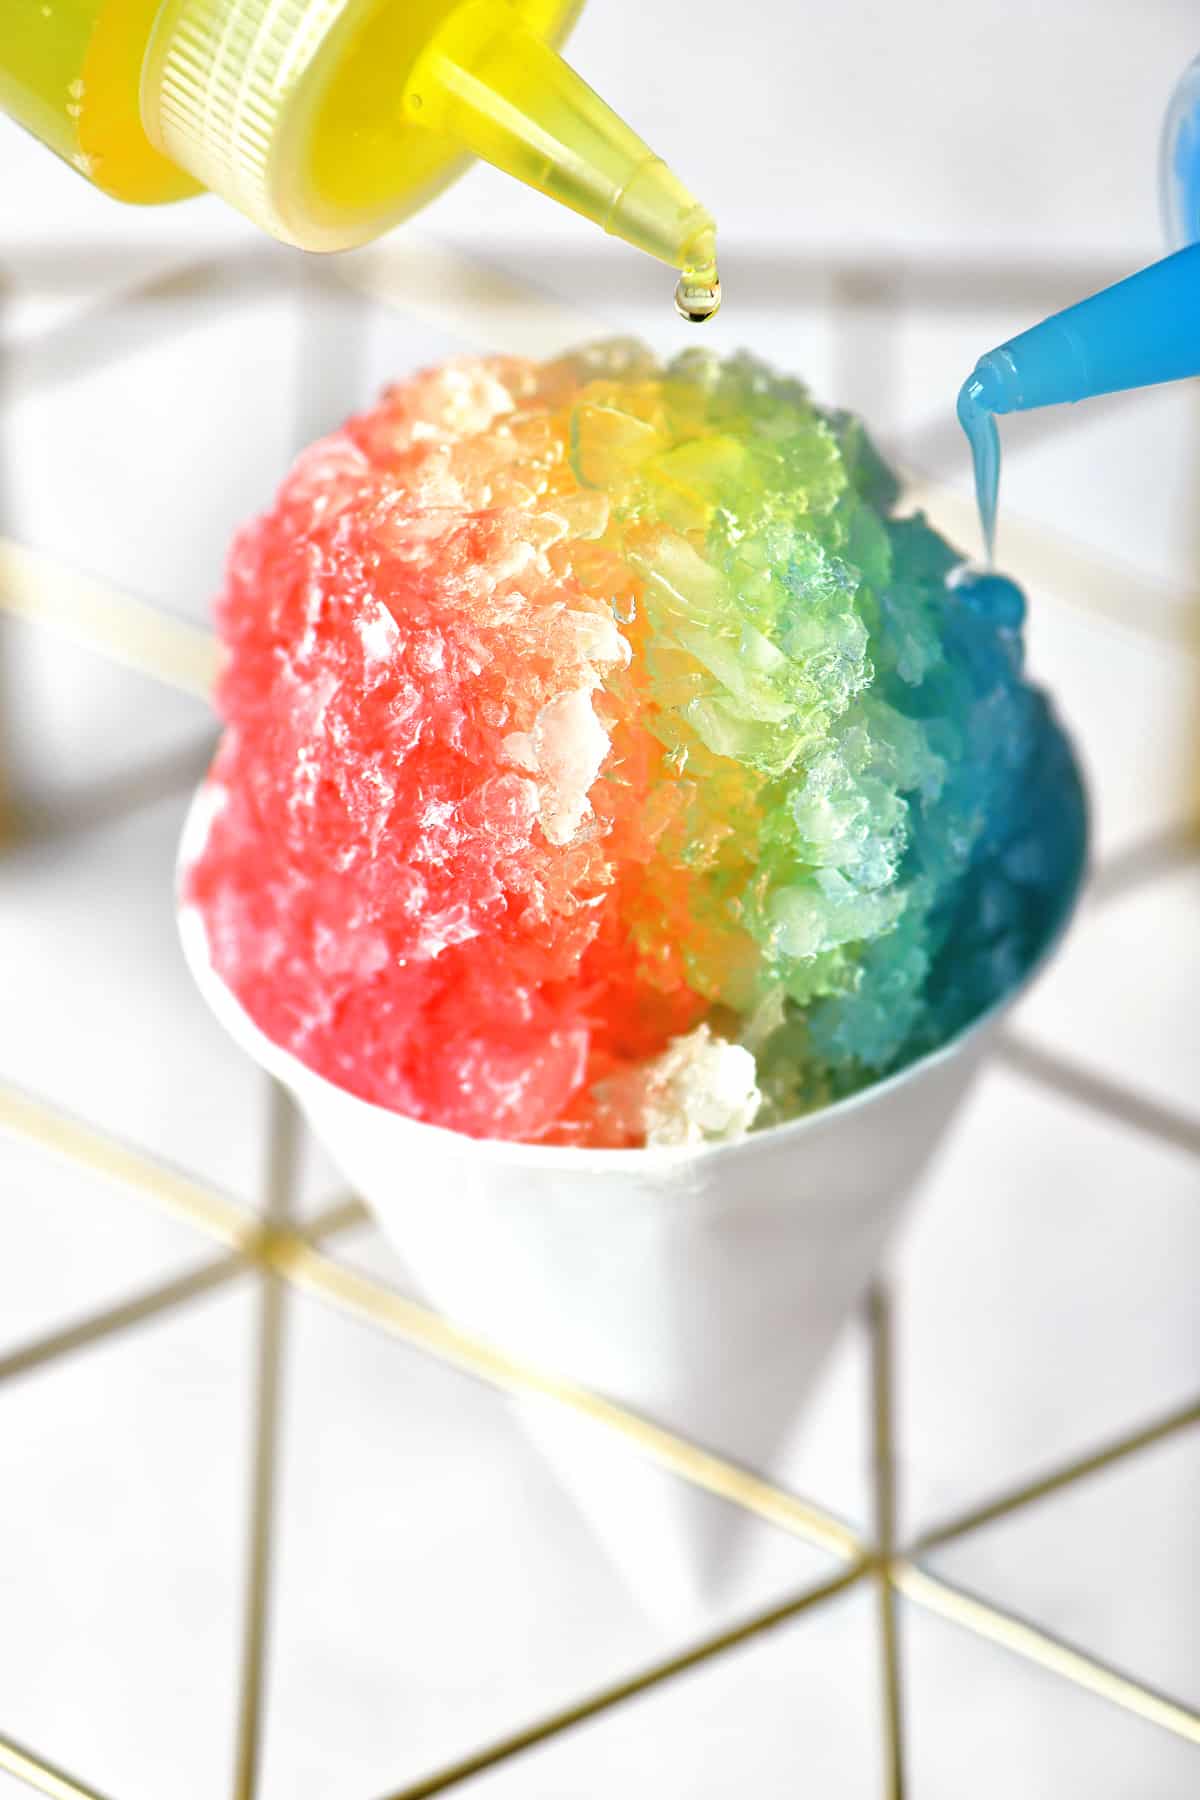 adding yellow and blue syrups to a classic snow cone